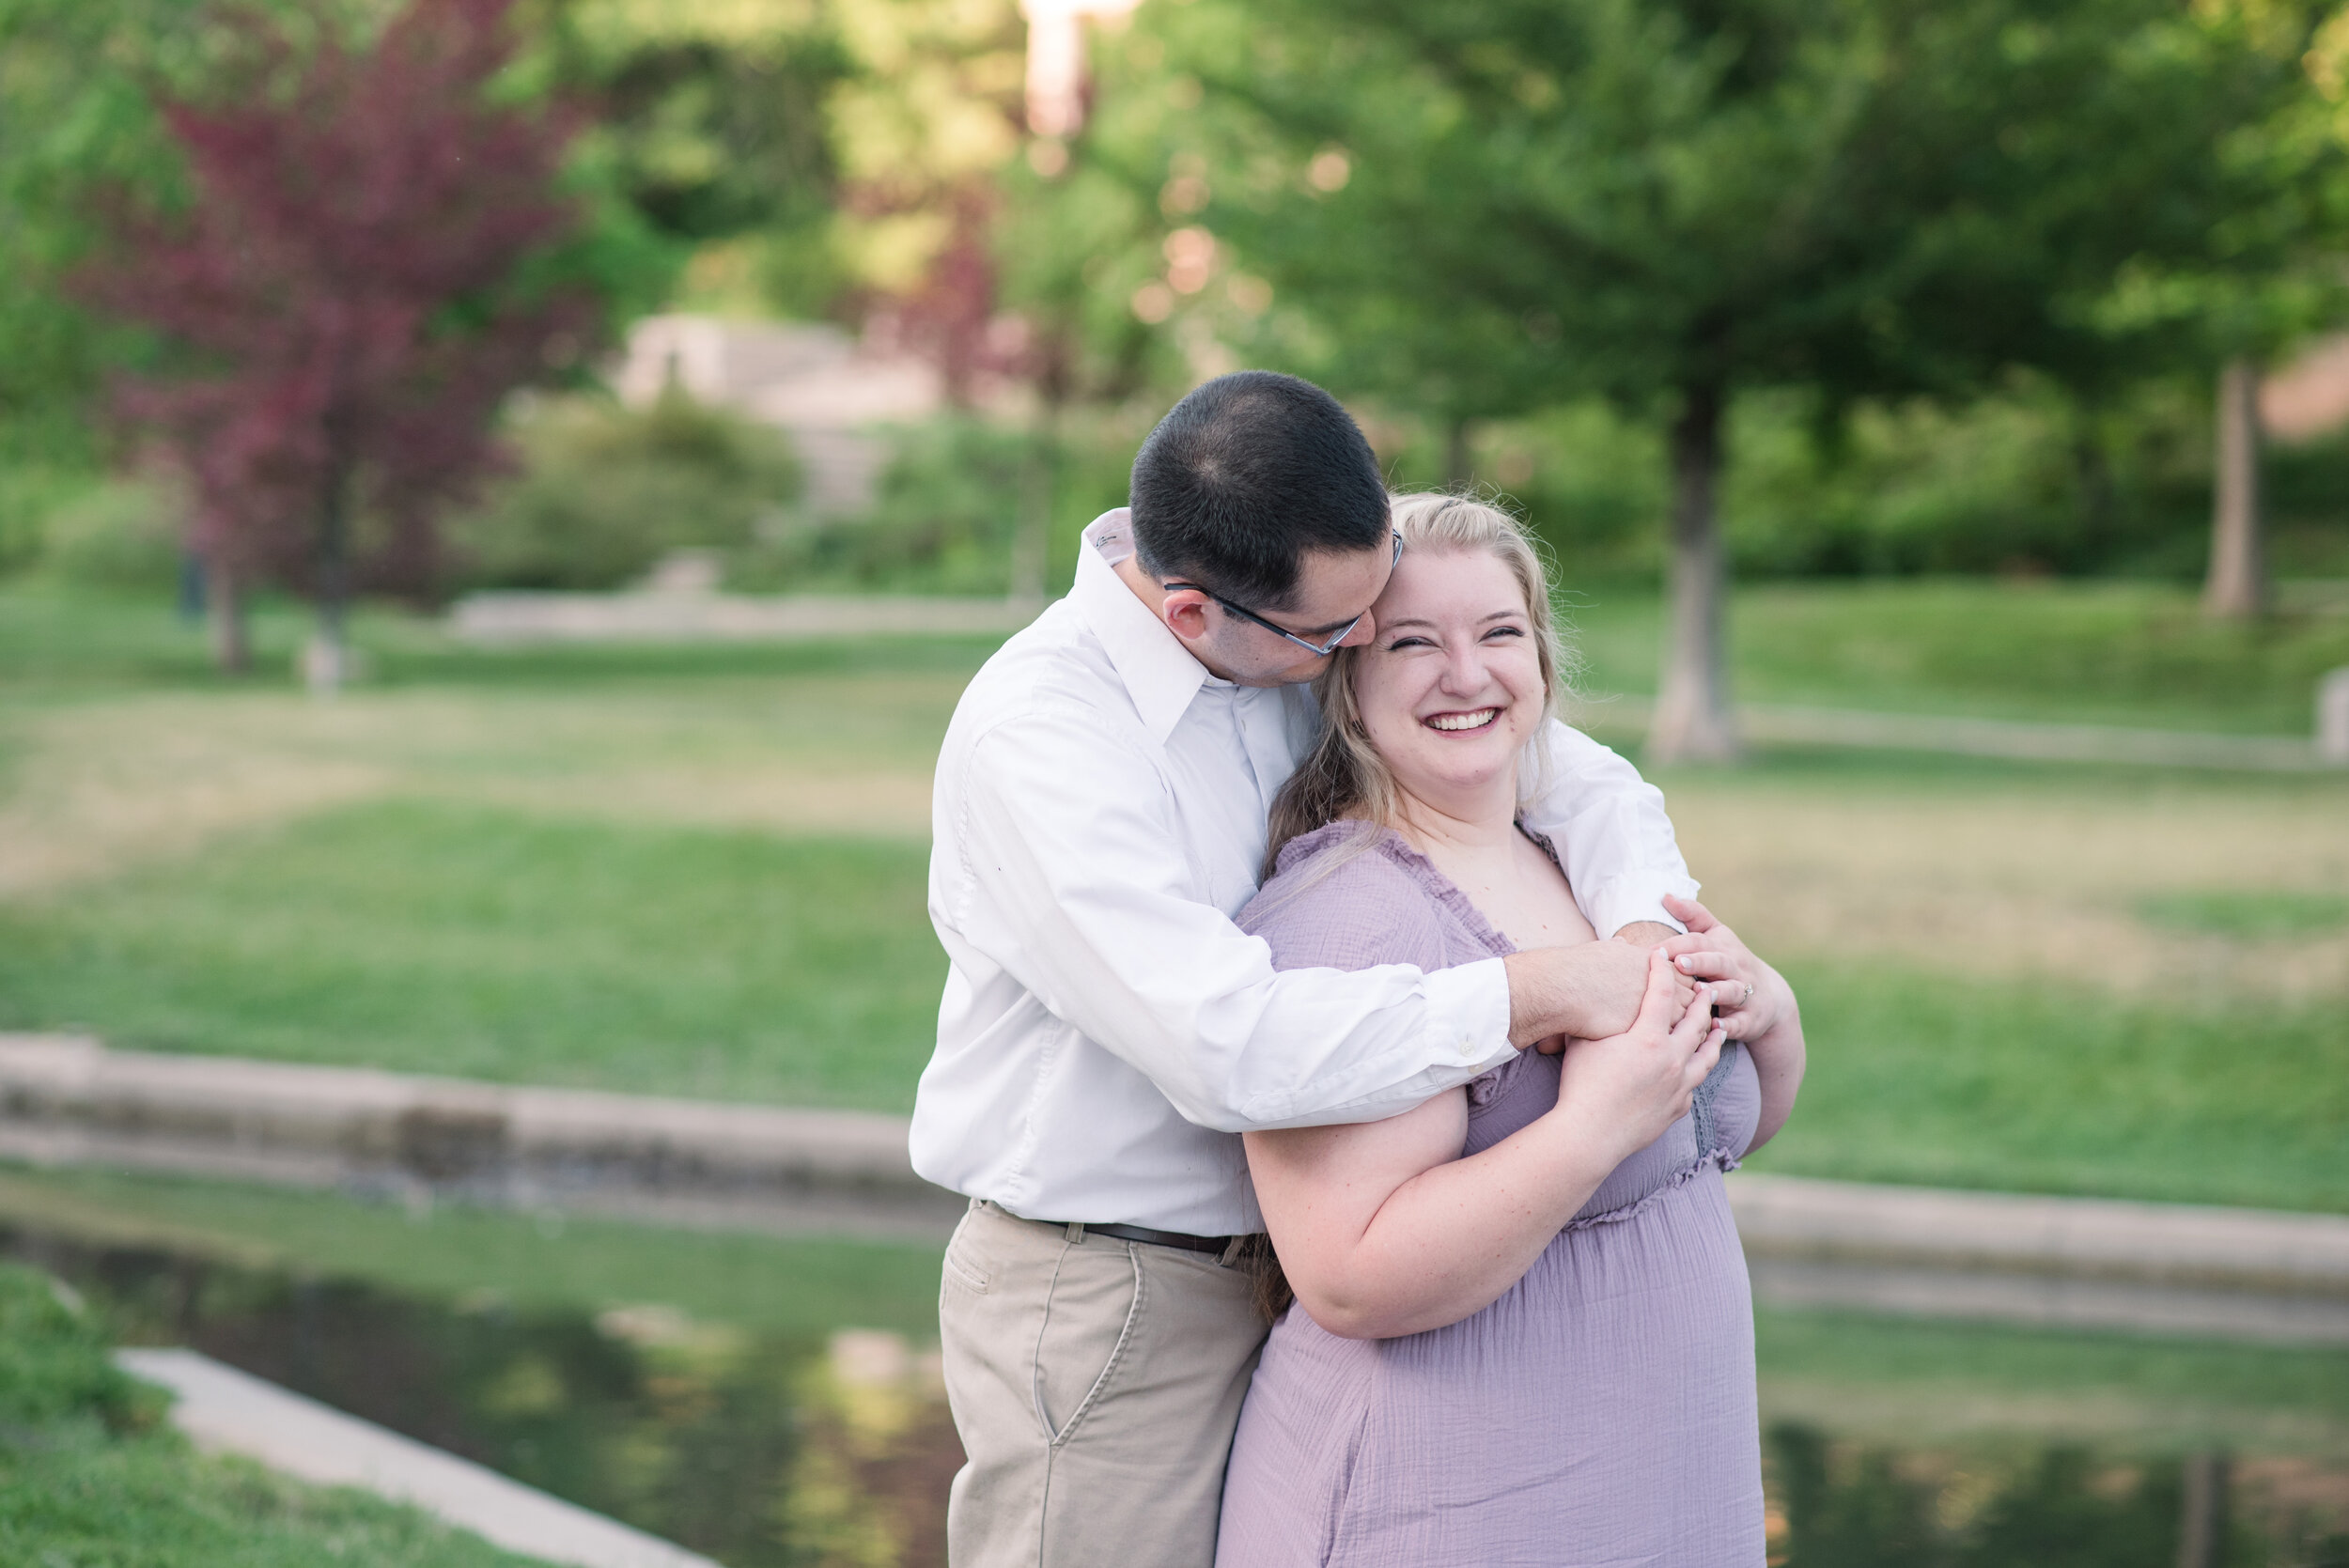 Utah_Wedding_Photographer_Engagement_Portraits_Cathedral_of_the_Madeline_Memory_Grove_Park 8.jpg